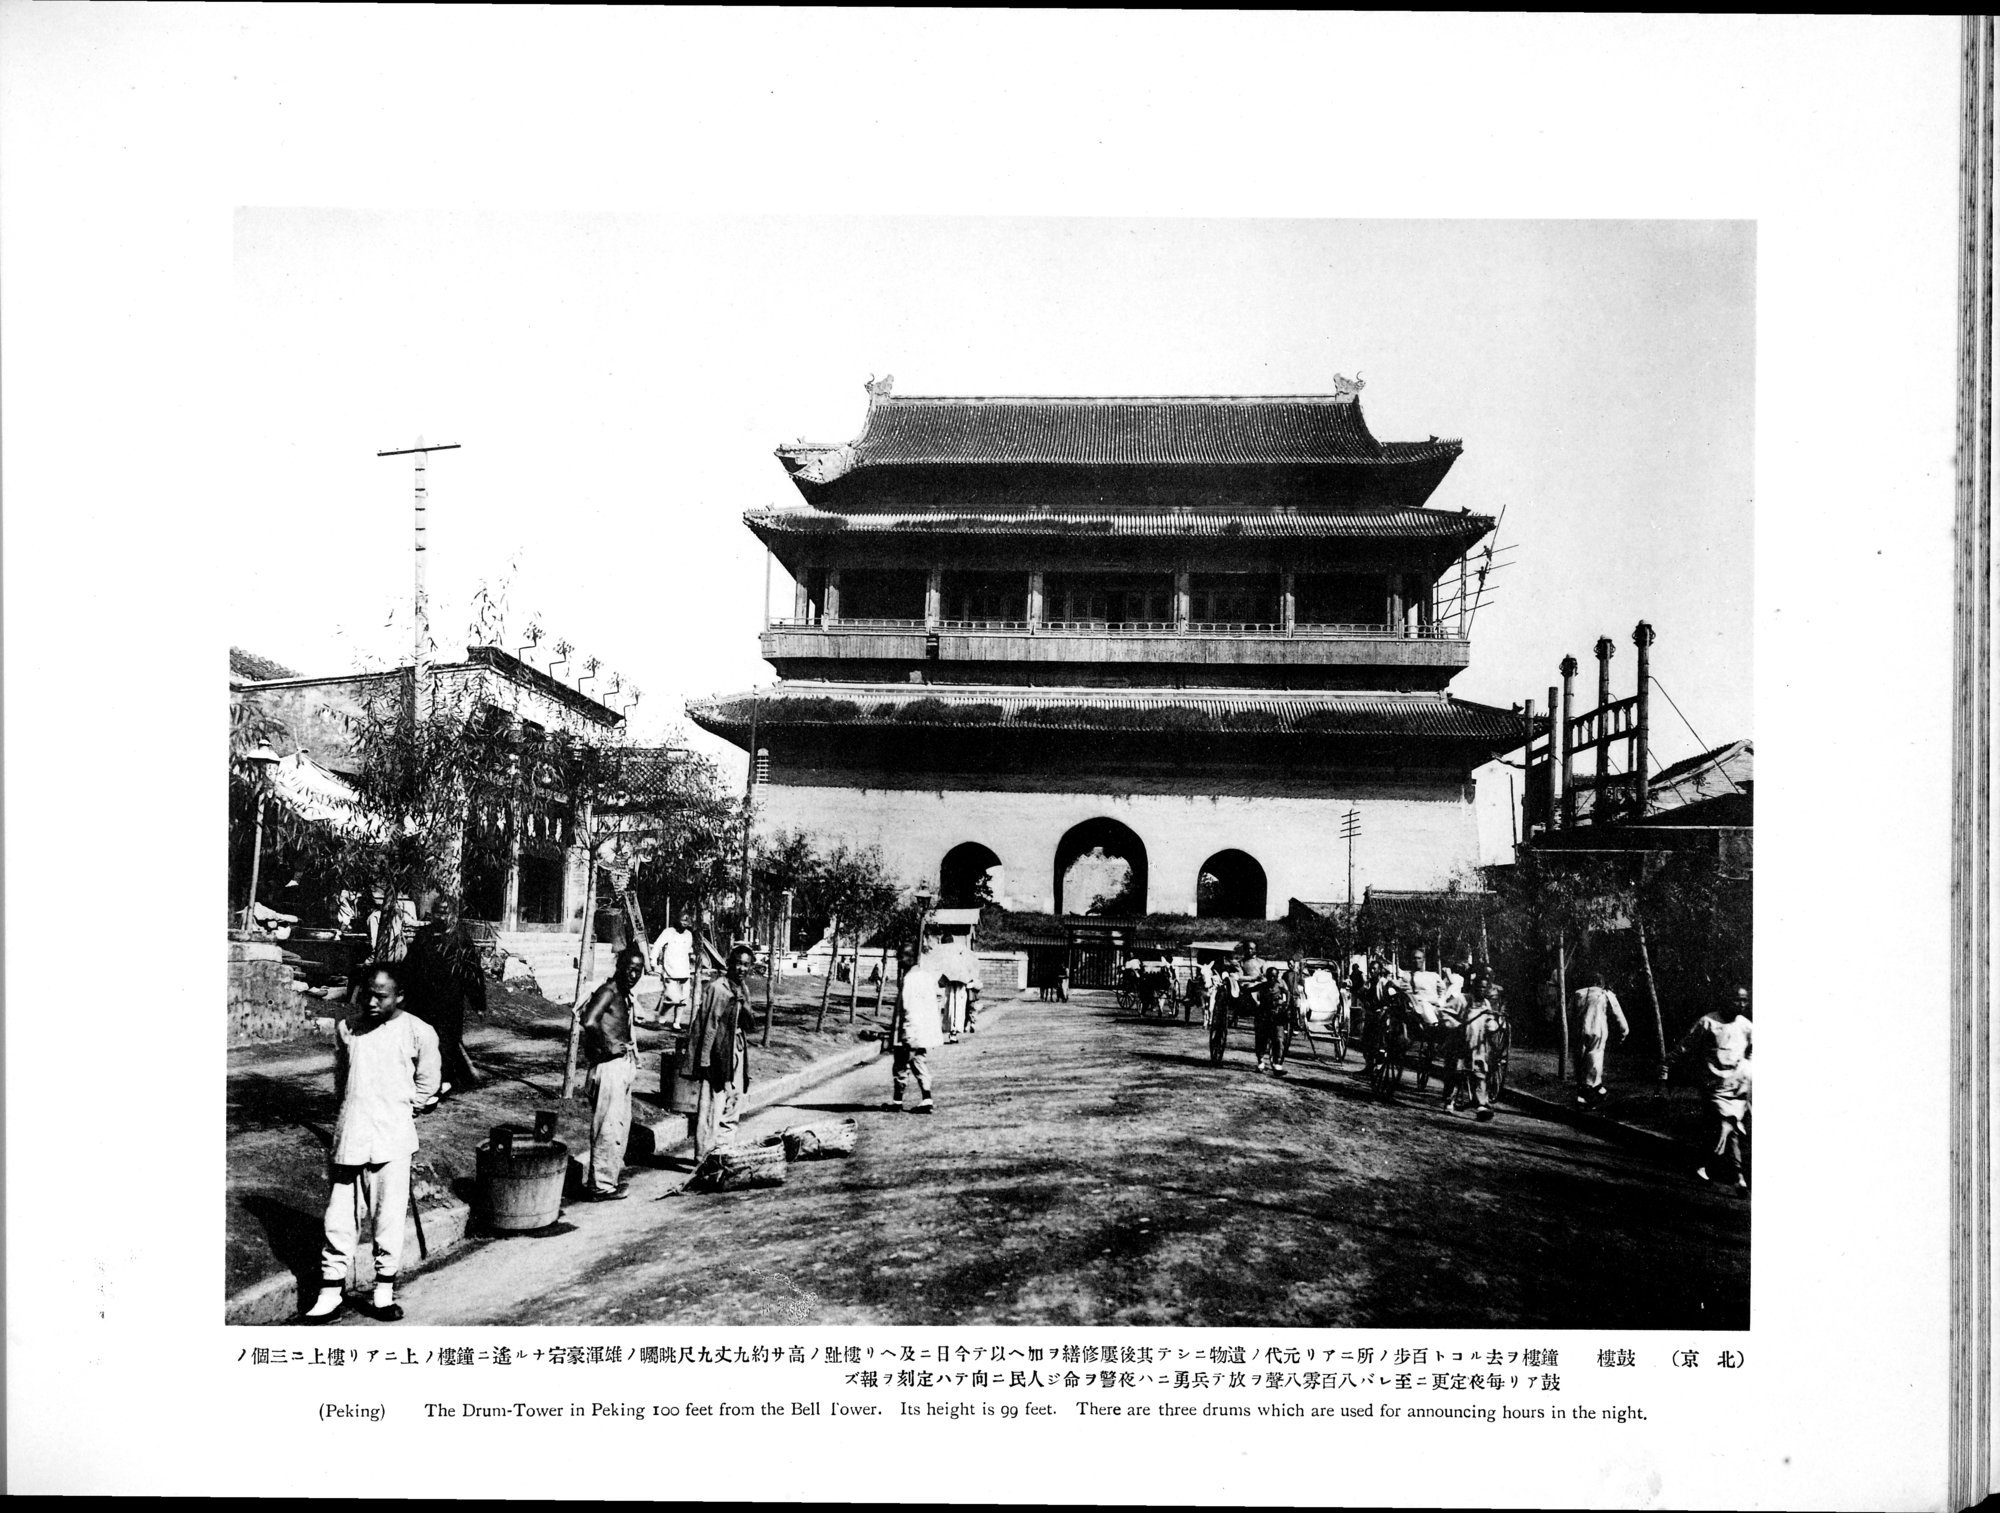 Views and Custom of North China : vol.1 / Page 155 (Grayscale High Resolution Image)